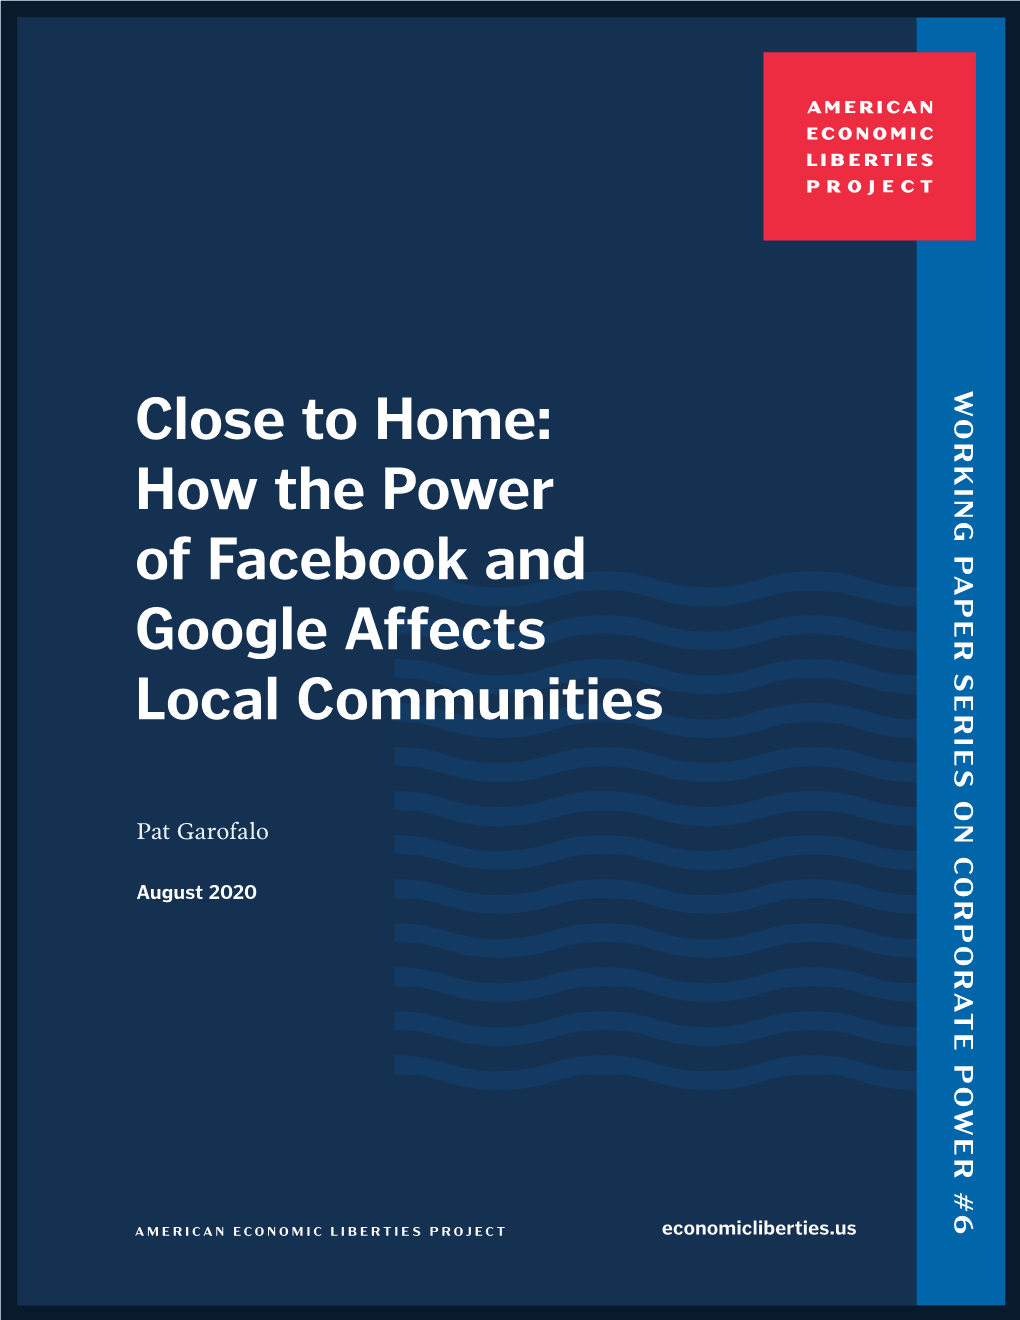 Close to Home: How the Power of Facebook and Google Affects Local Communities